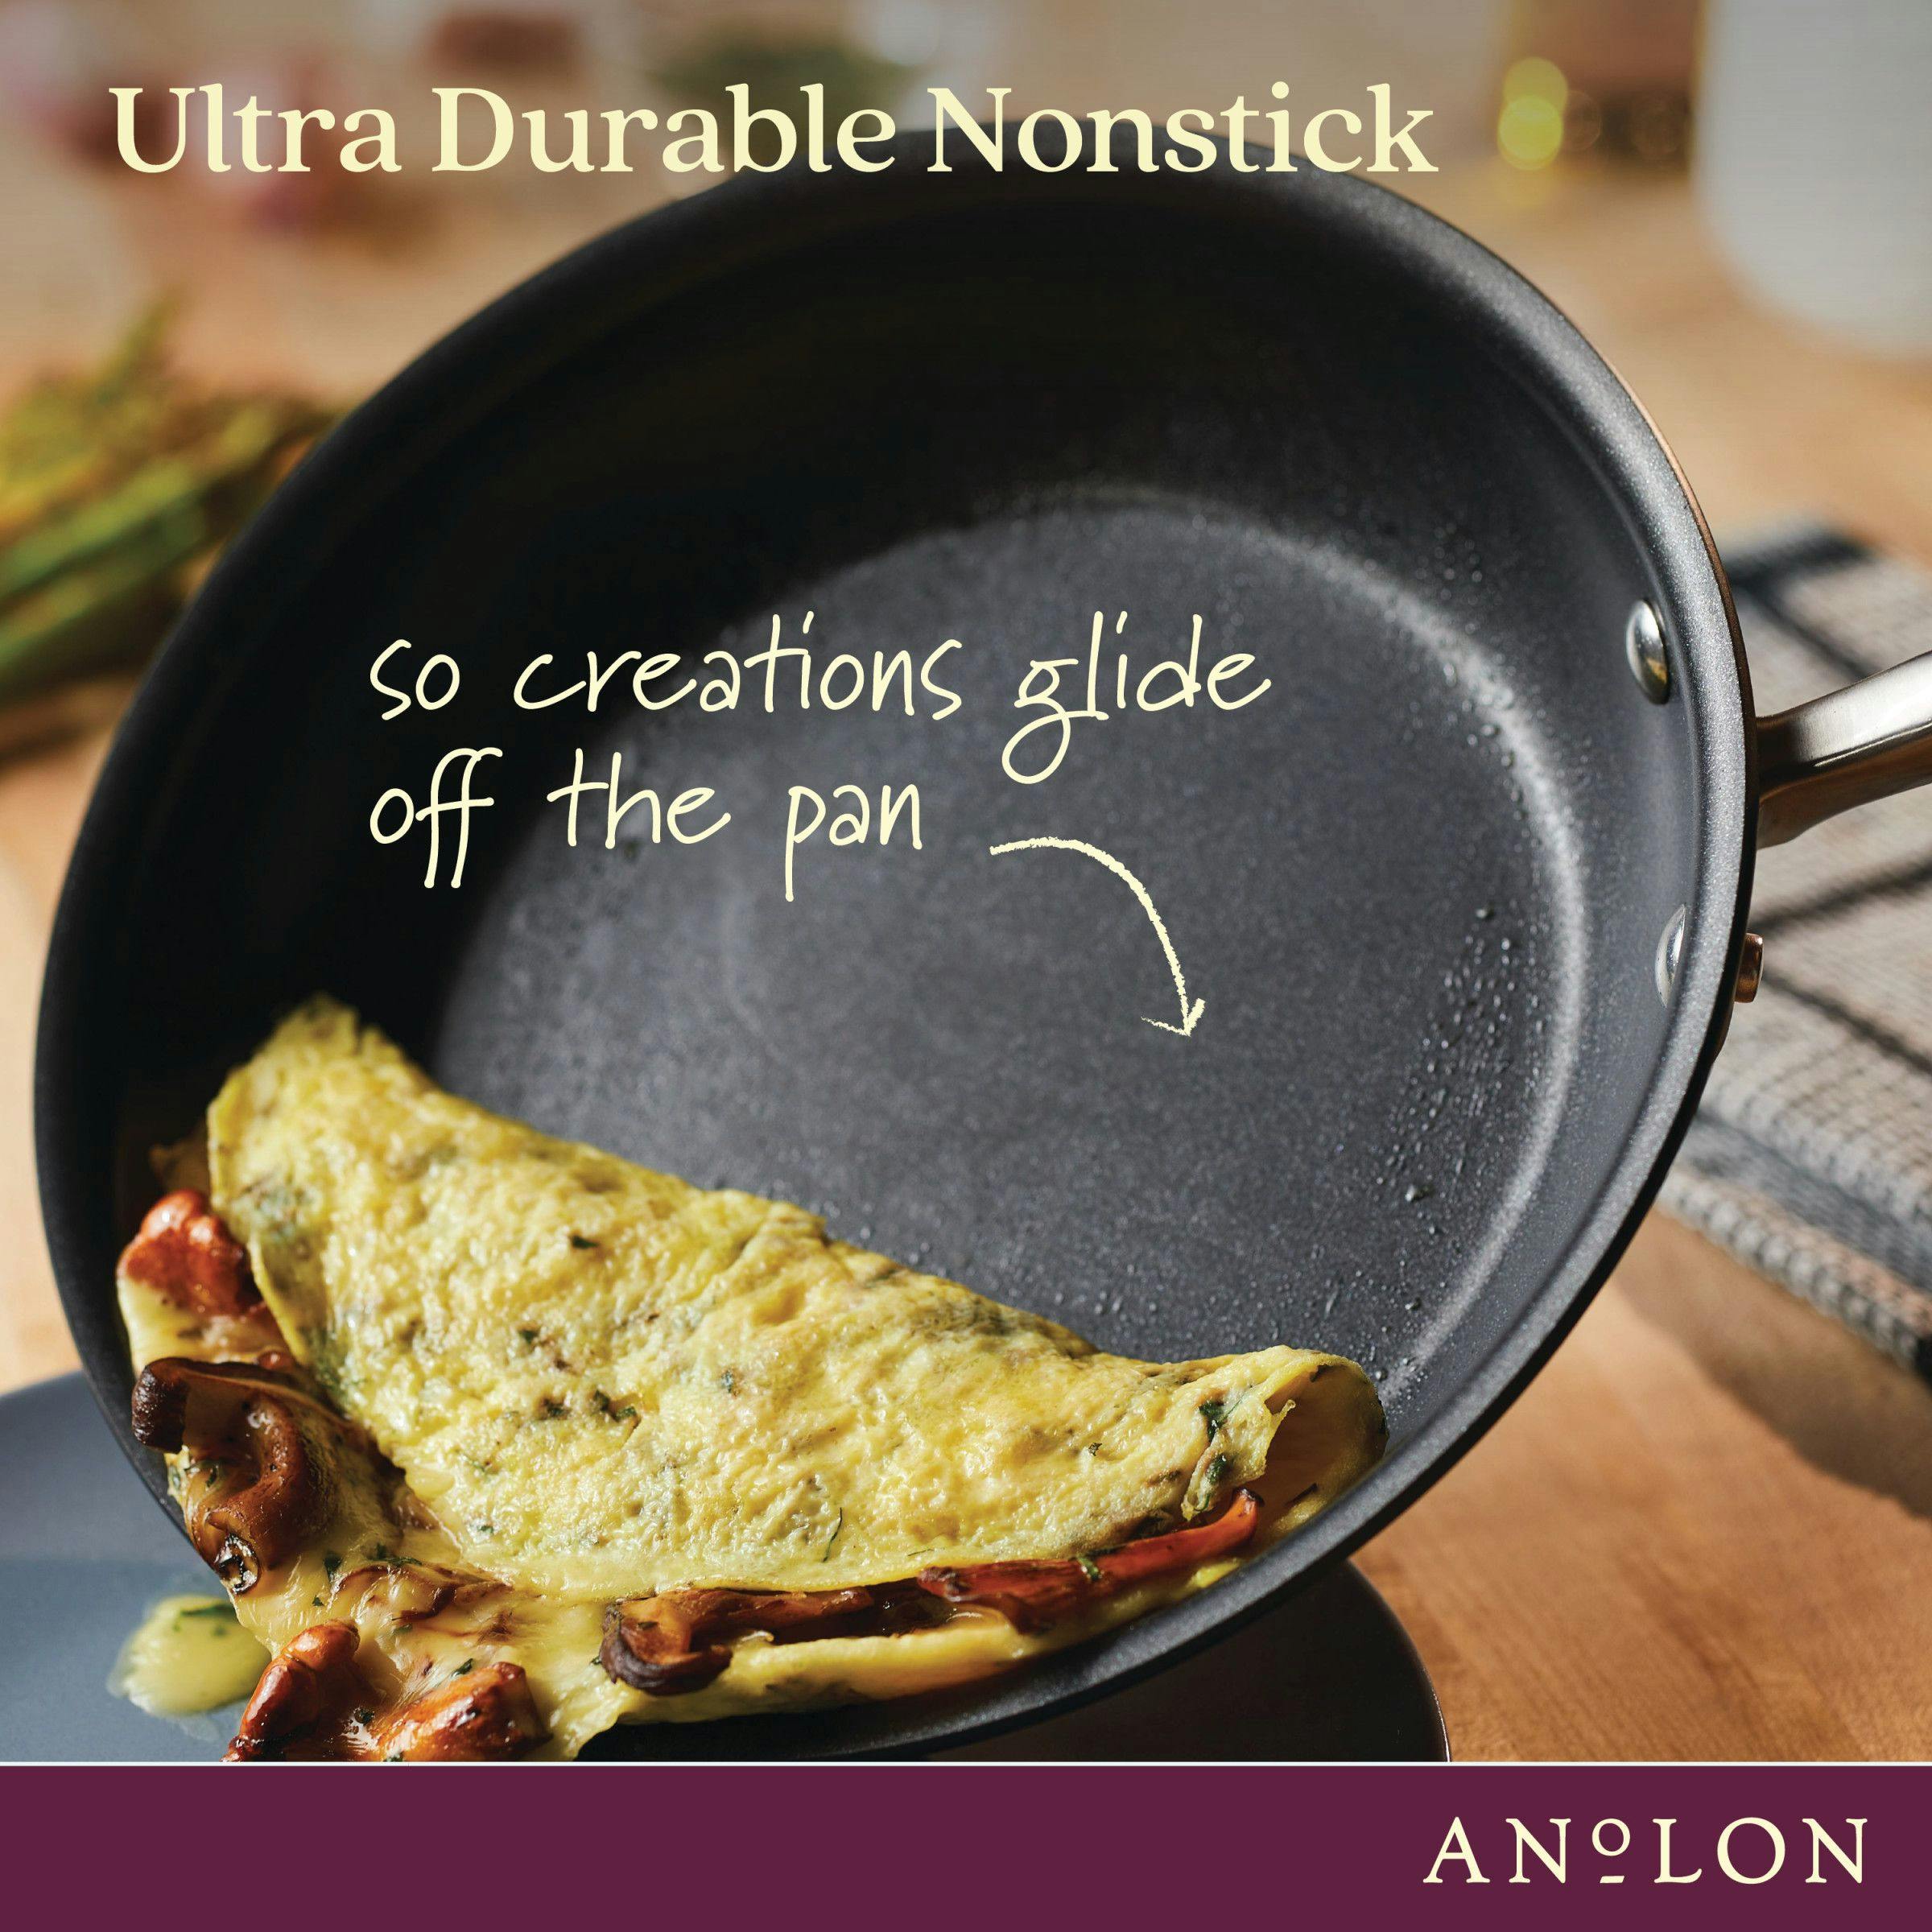 Anolon Advanced Home Hard-Anodized Nonstick Frying Pan with Helper Handle, 14.5-Inch, Onyx